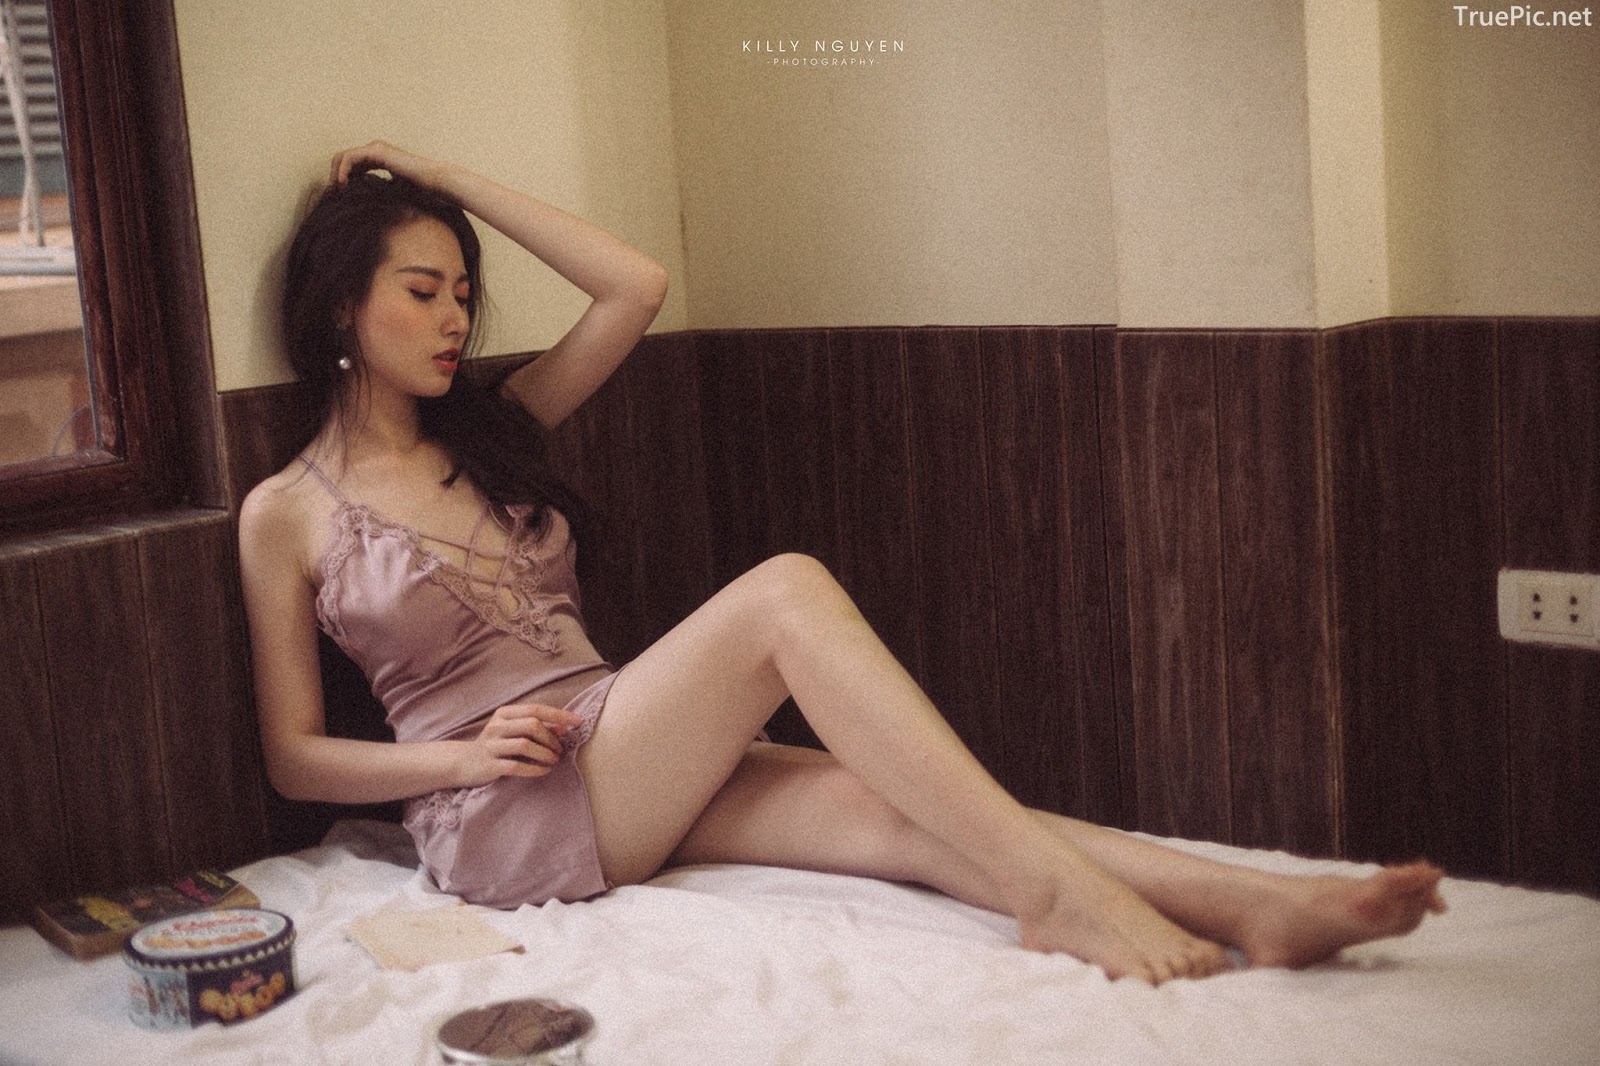 Vietnamese hot model - The beautiful girl in the empty room - Photo by Killy Nguyen - TruePic.net - Picture 12